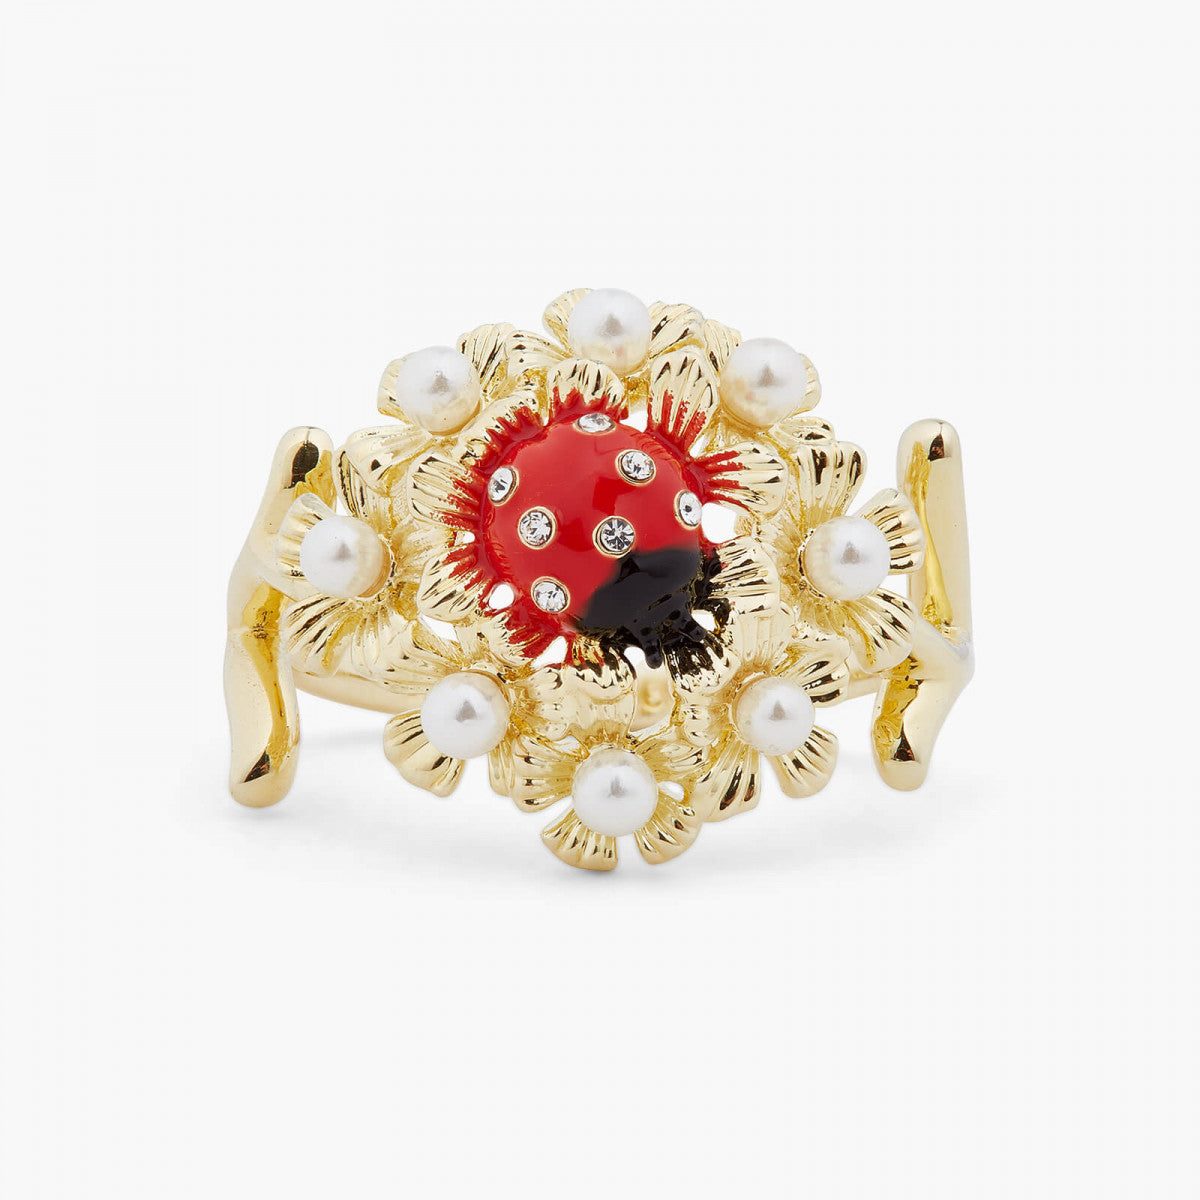 LADYBIRD AND WOOD ANEMONE COCKTAIL RING